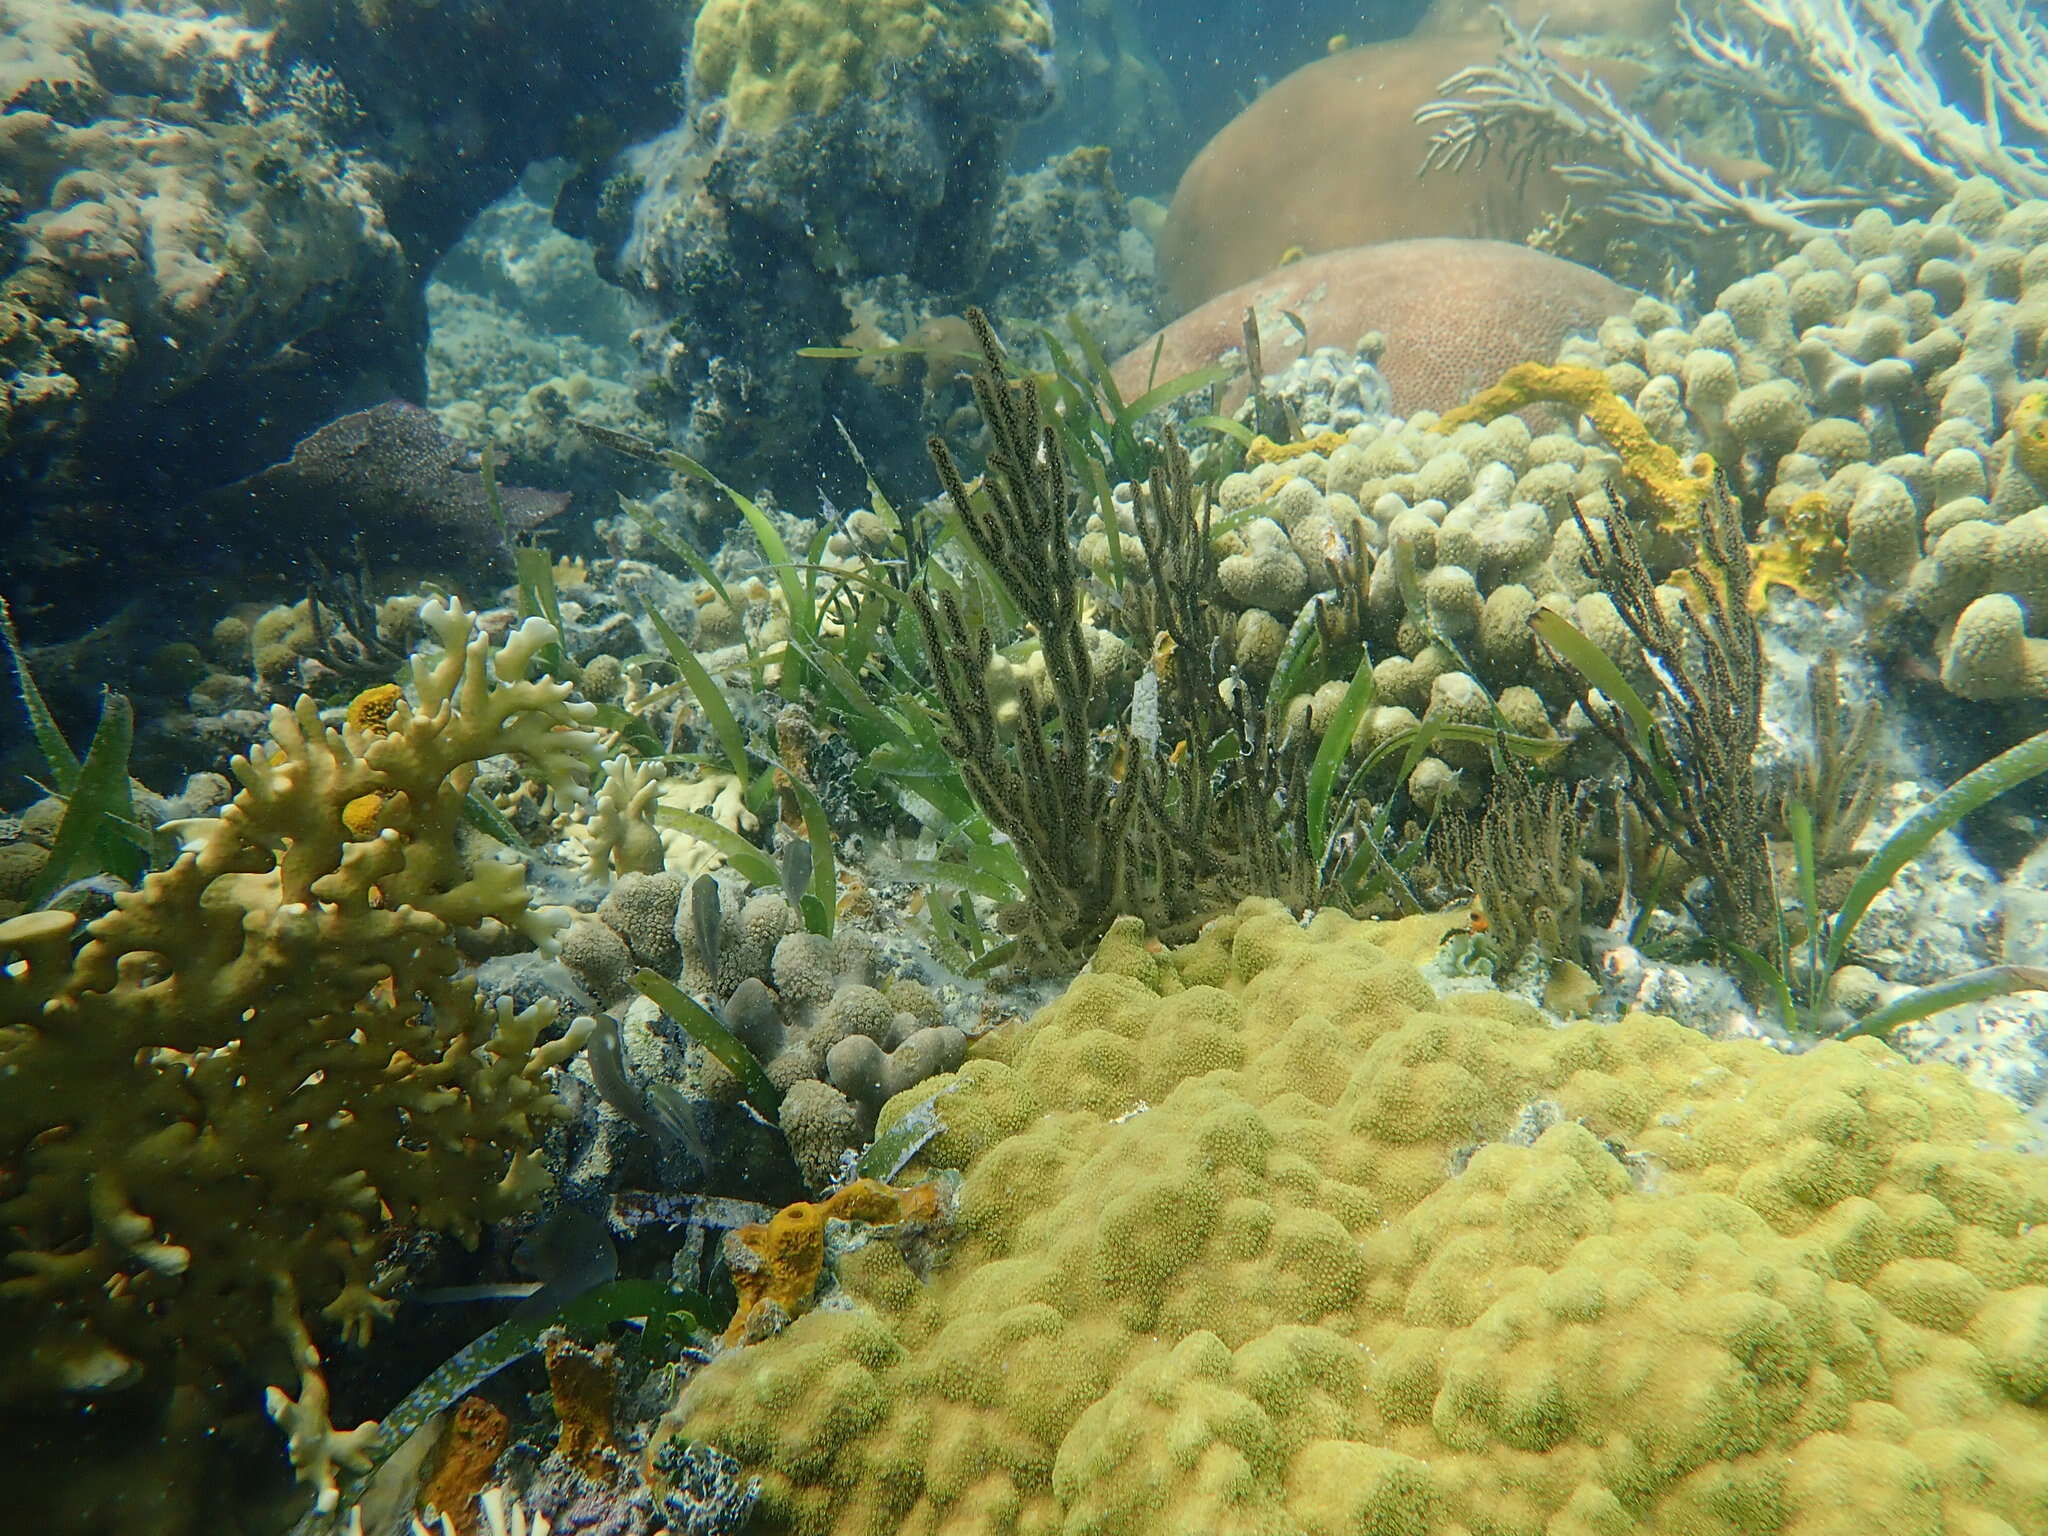 Image of Mustard Hill Coral